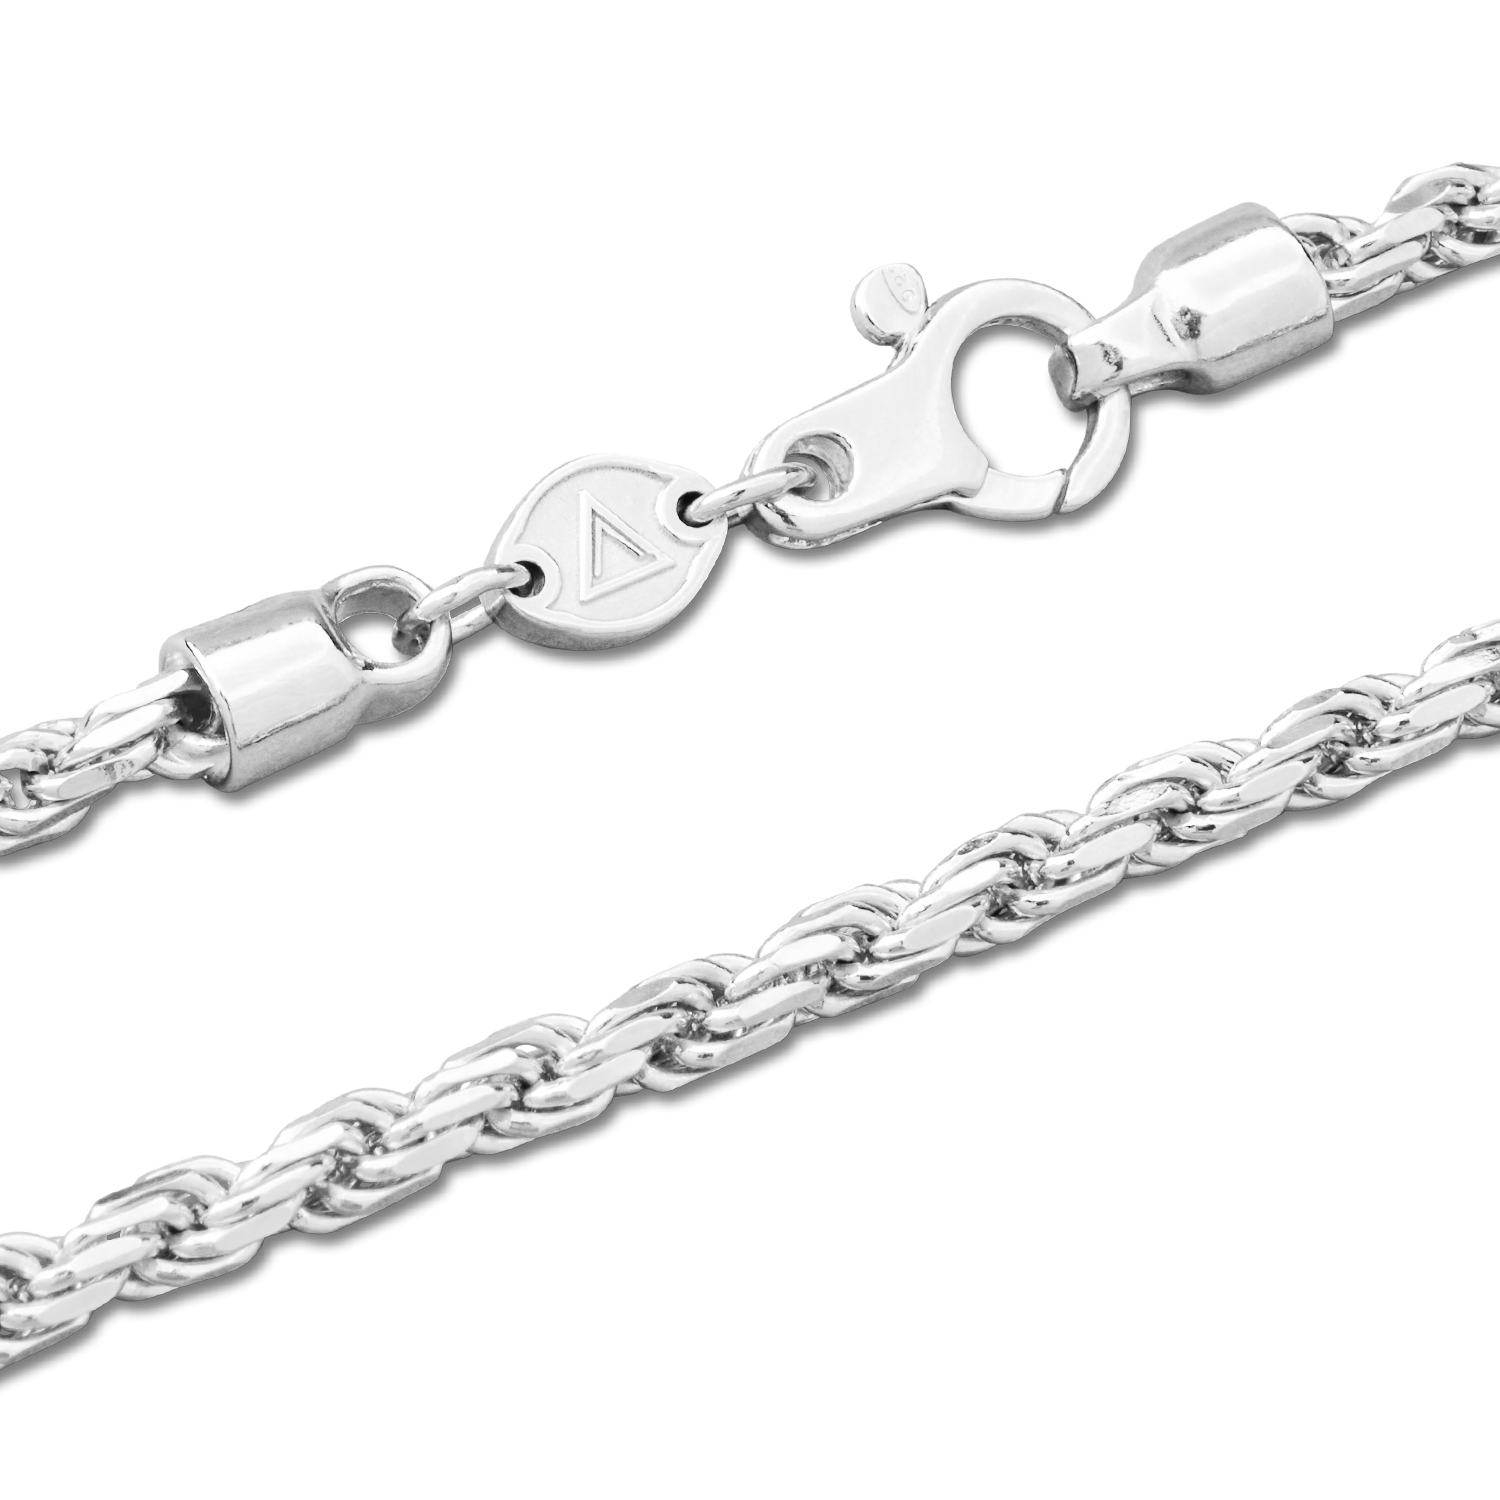 Sterling Silver Rope Chain - 4mm, Oxford Collection